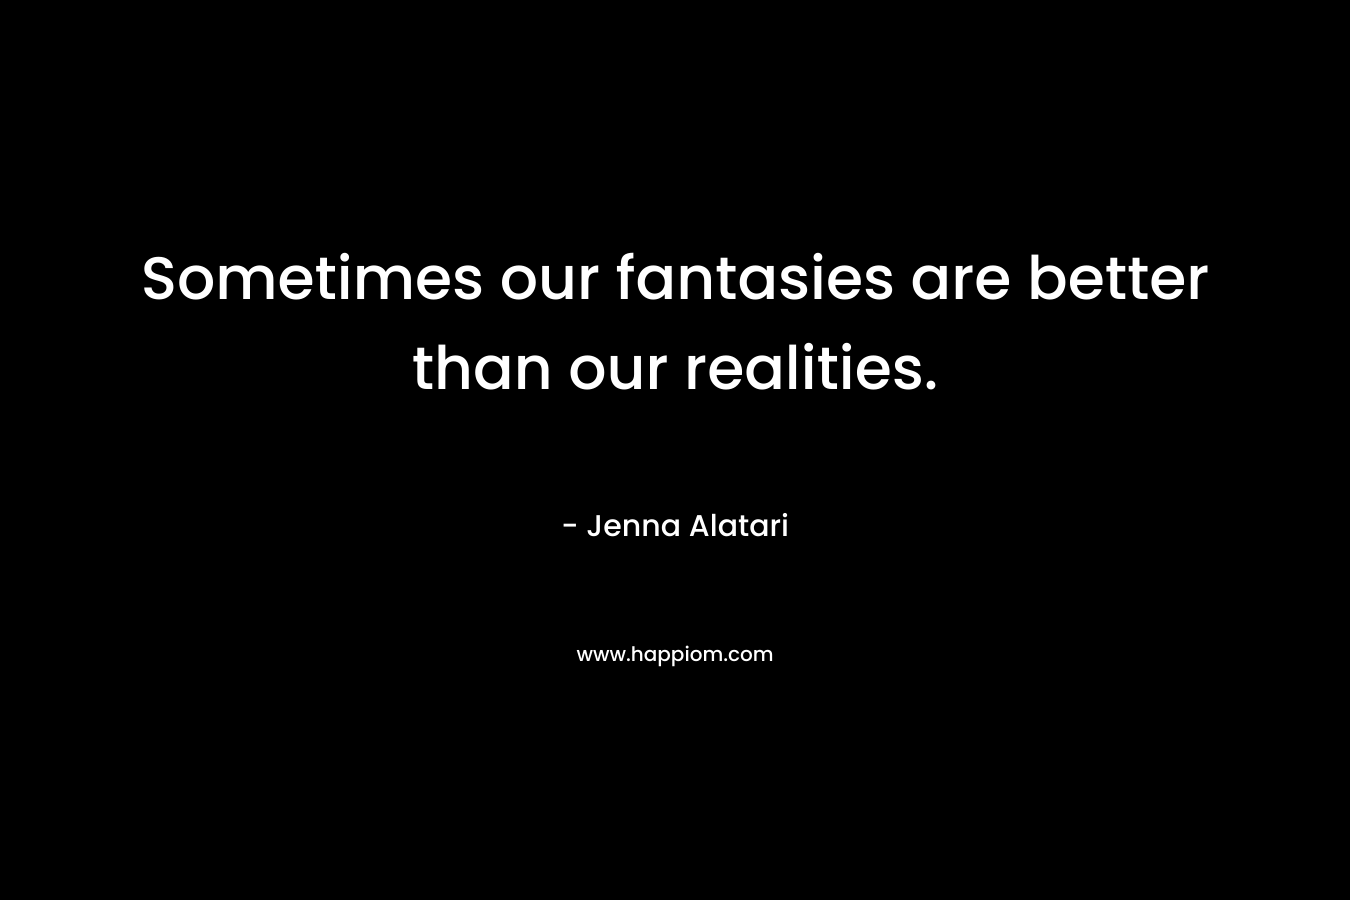 Sometimes our fantasies are better than our realities.